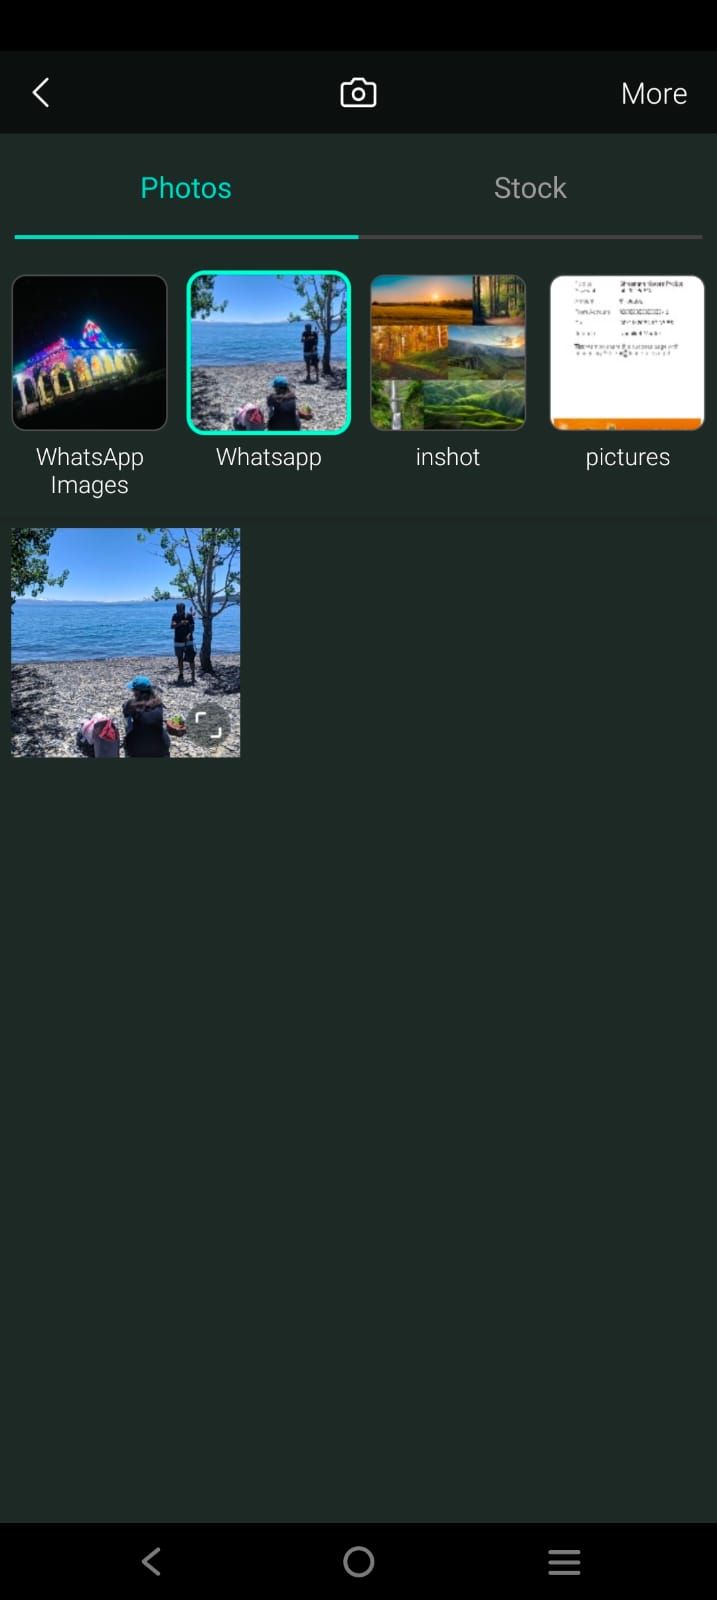 Screenshot of the image gallery